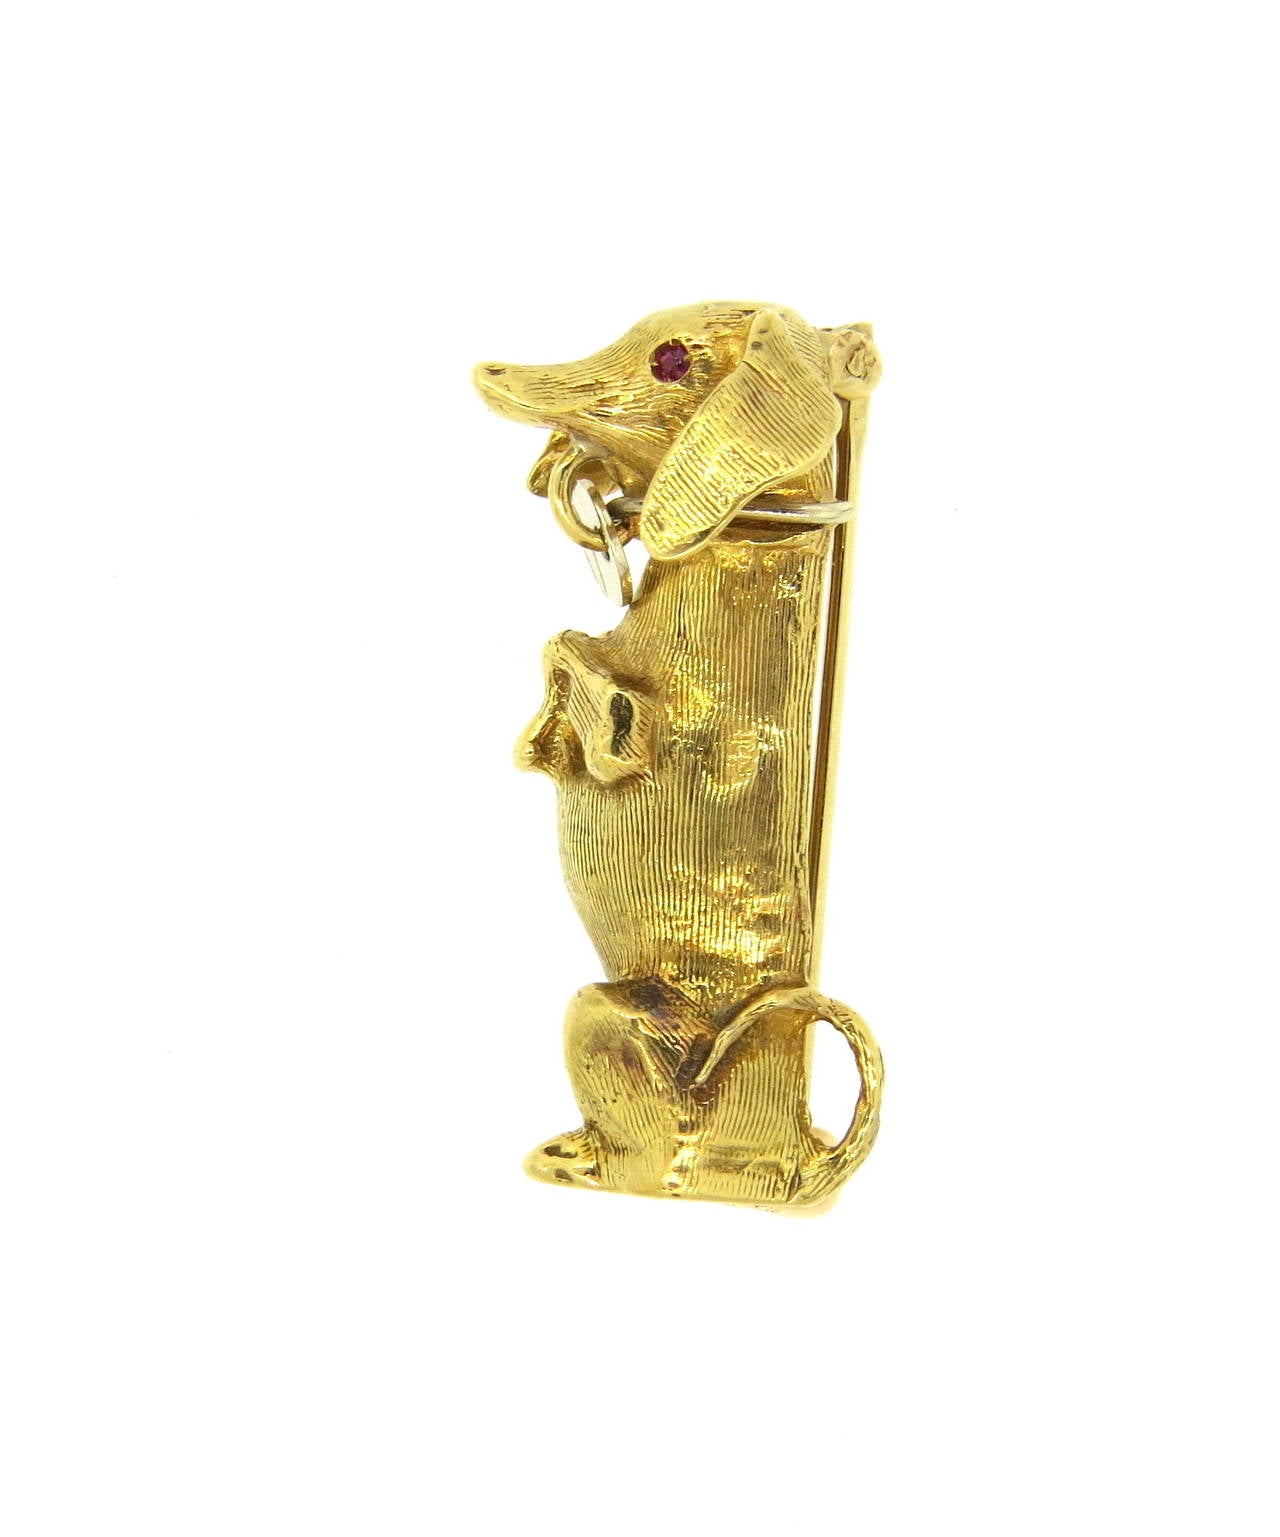 Vintage 18k gold brooch pin, depicting dachshund dog, with ruby eyes. Brooch measures 31mm x 15mm. Weight of the piece - 7.4 grams